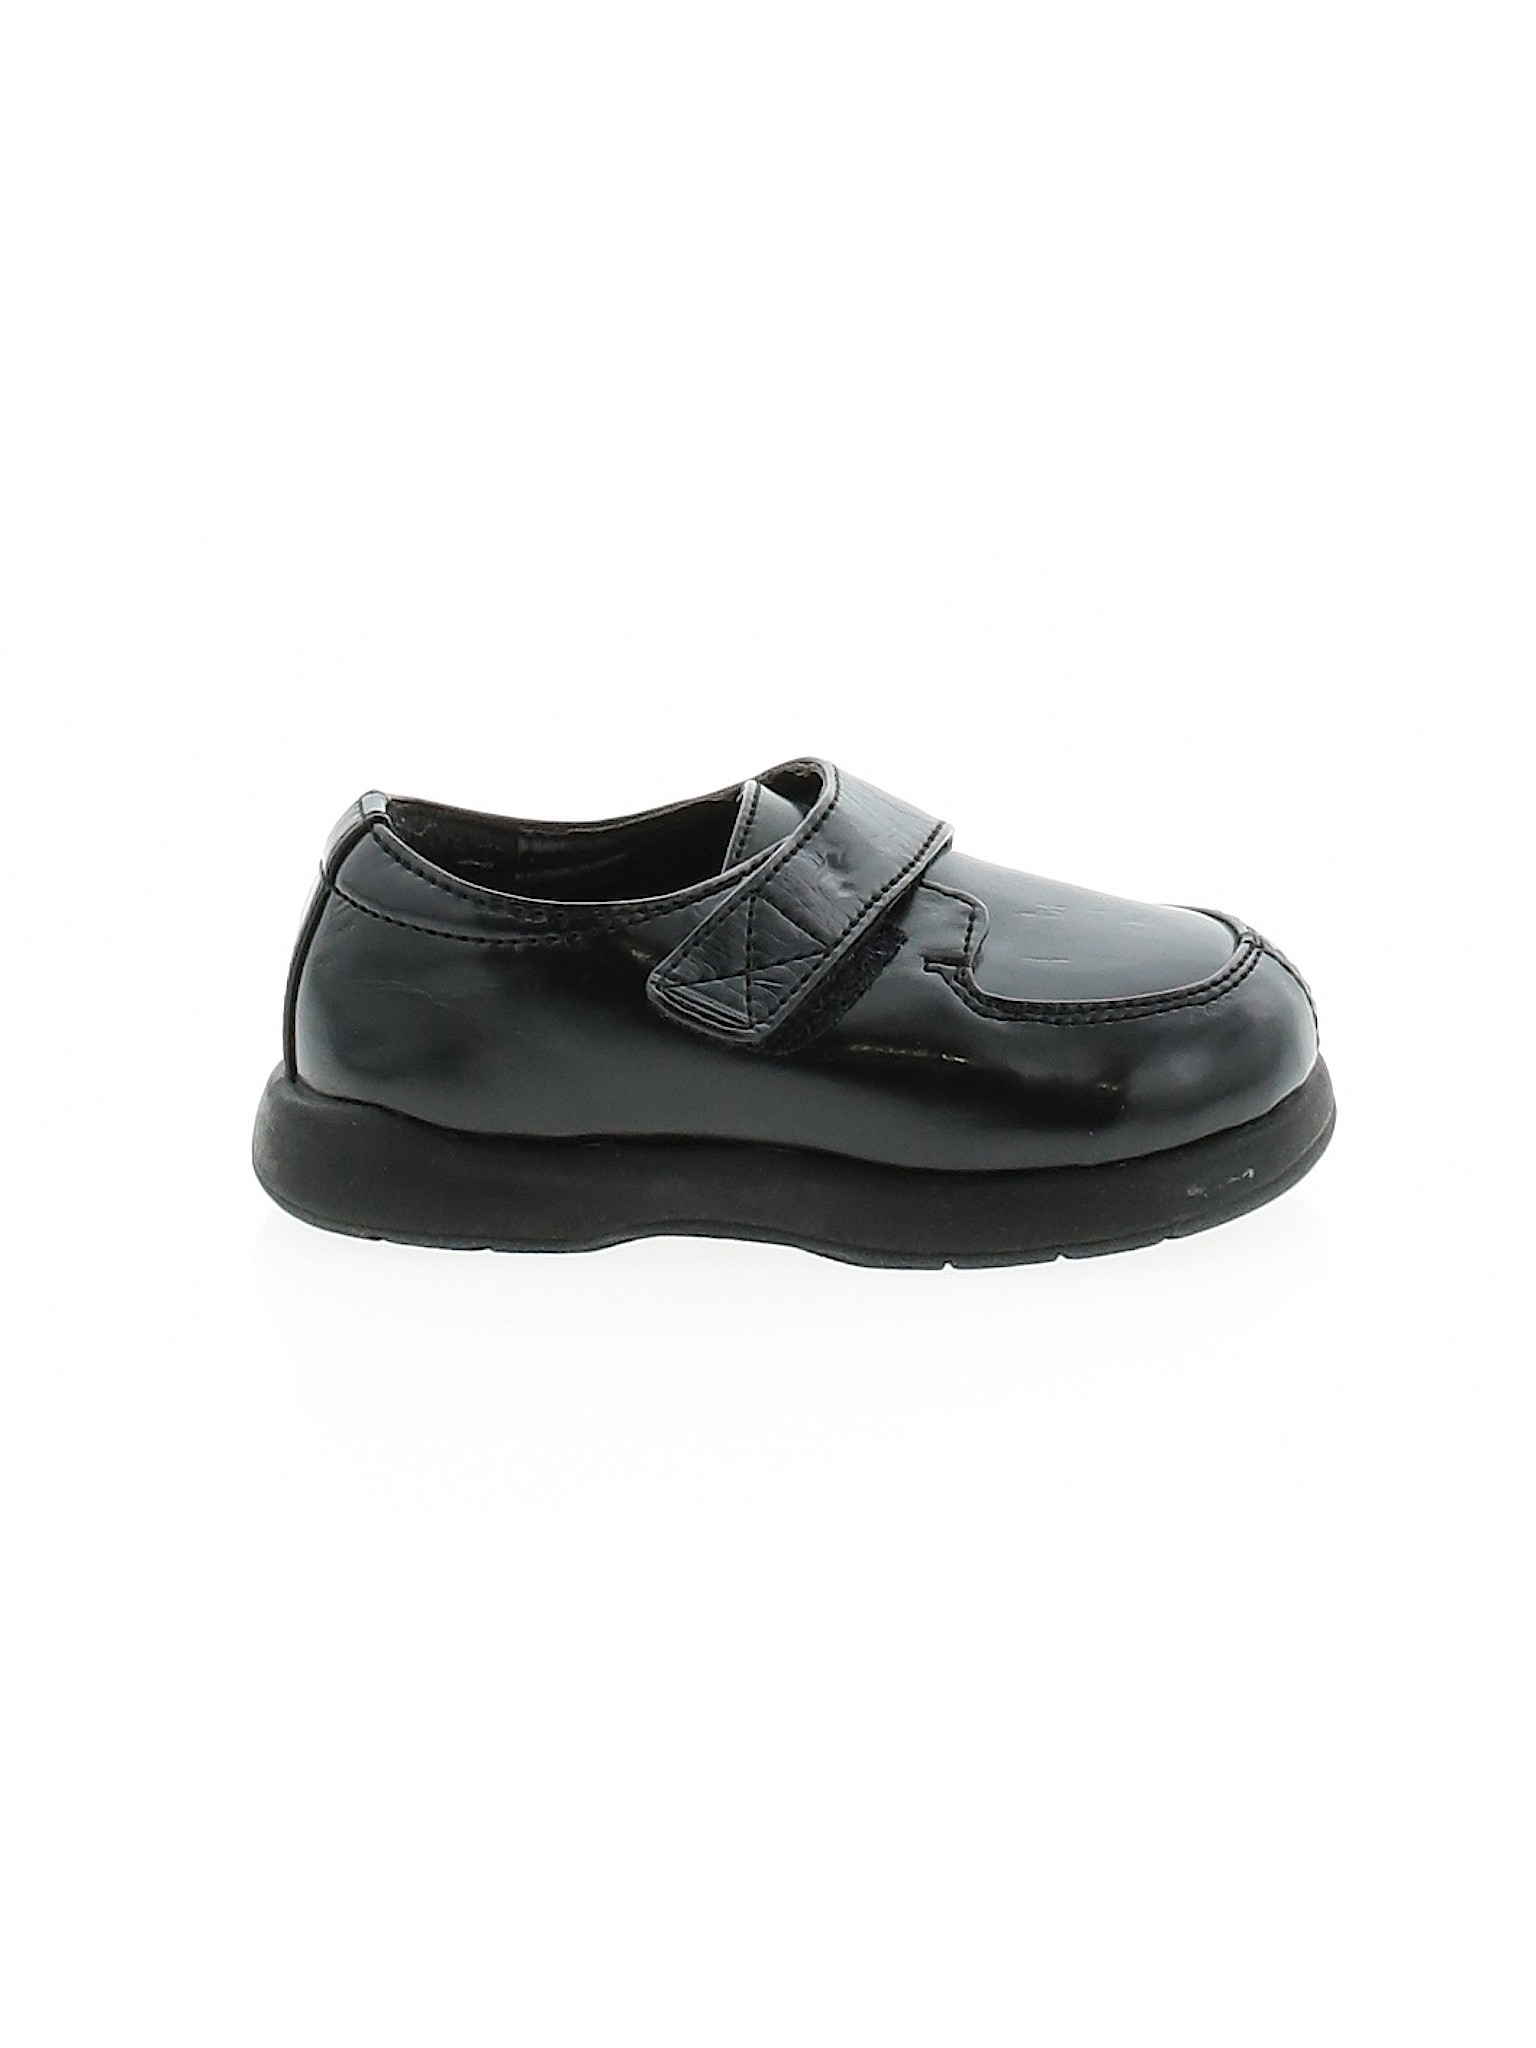 Toddler's boys casual/dress shoes wing 